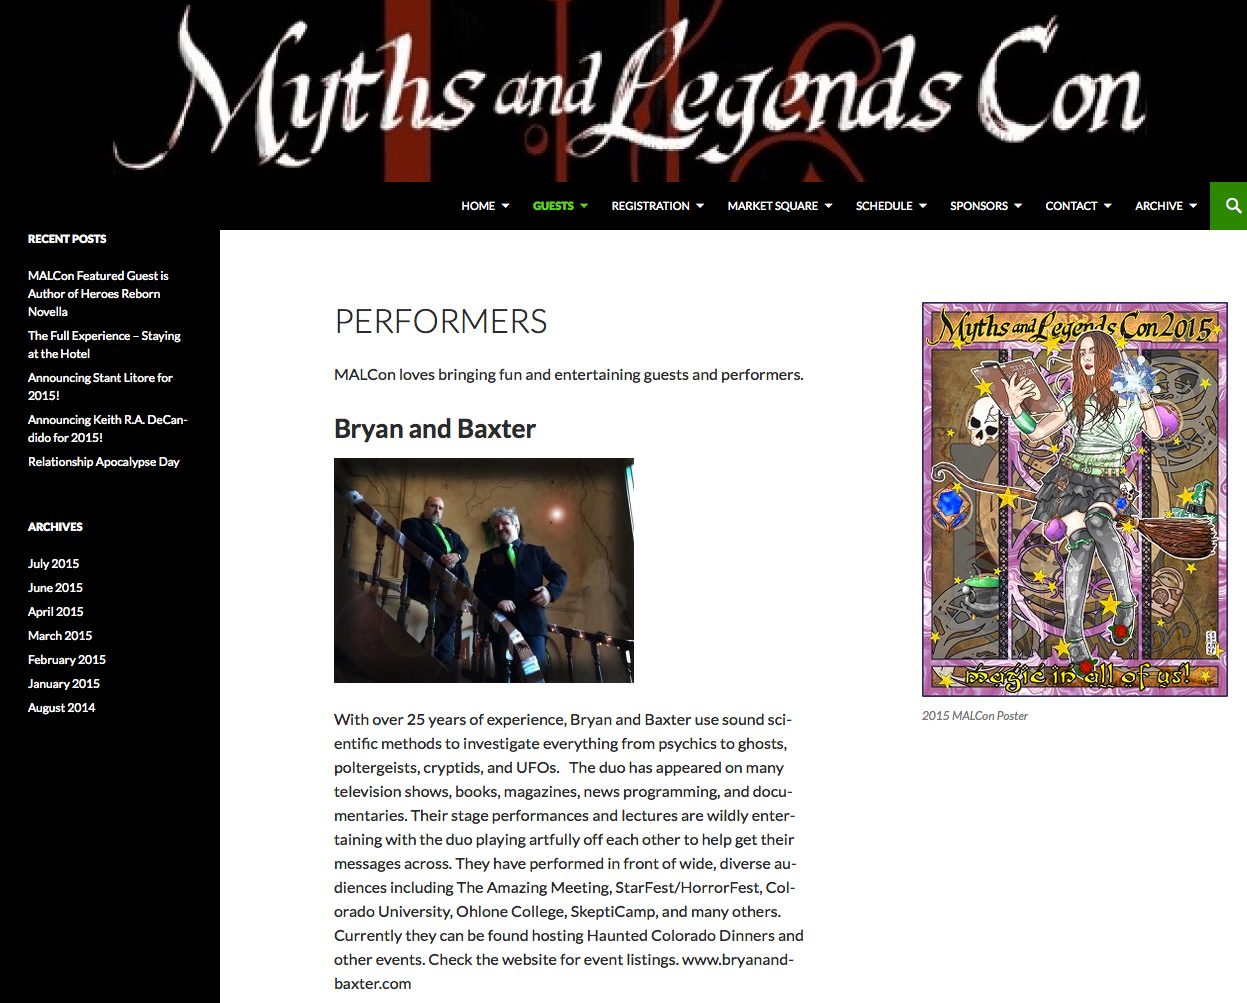 Myths and Legends Con